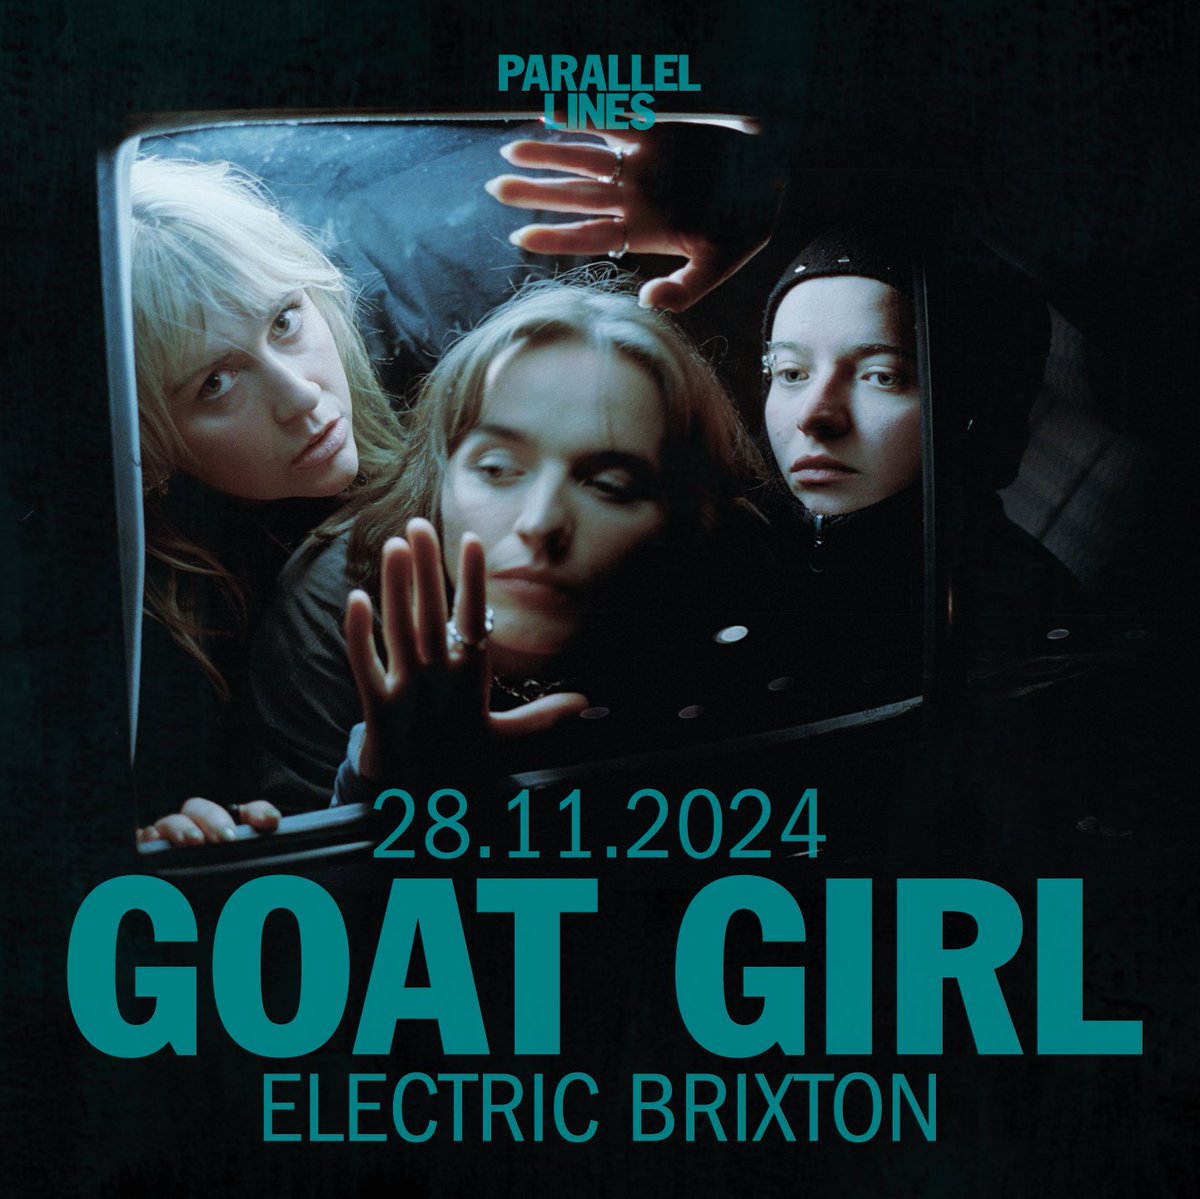 Tickets for @g0atg1rl & their 28th November show here at Electric are now LIVE. Pick up yours via @TicketWebUK here: tinyurl.com/yk79wedh #Electric #Live #GoatGirl